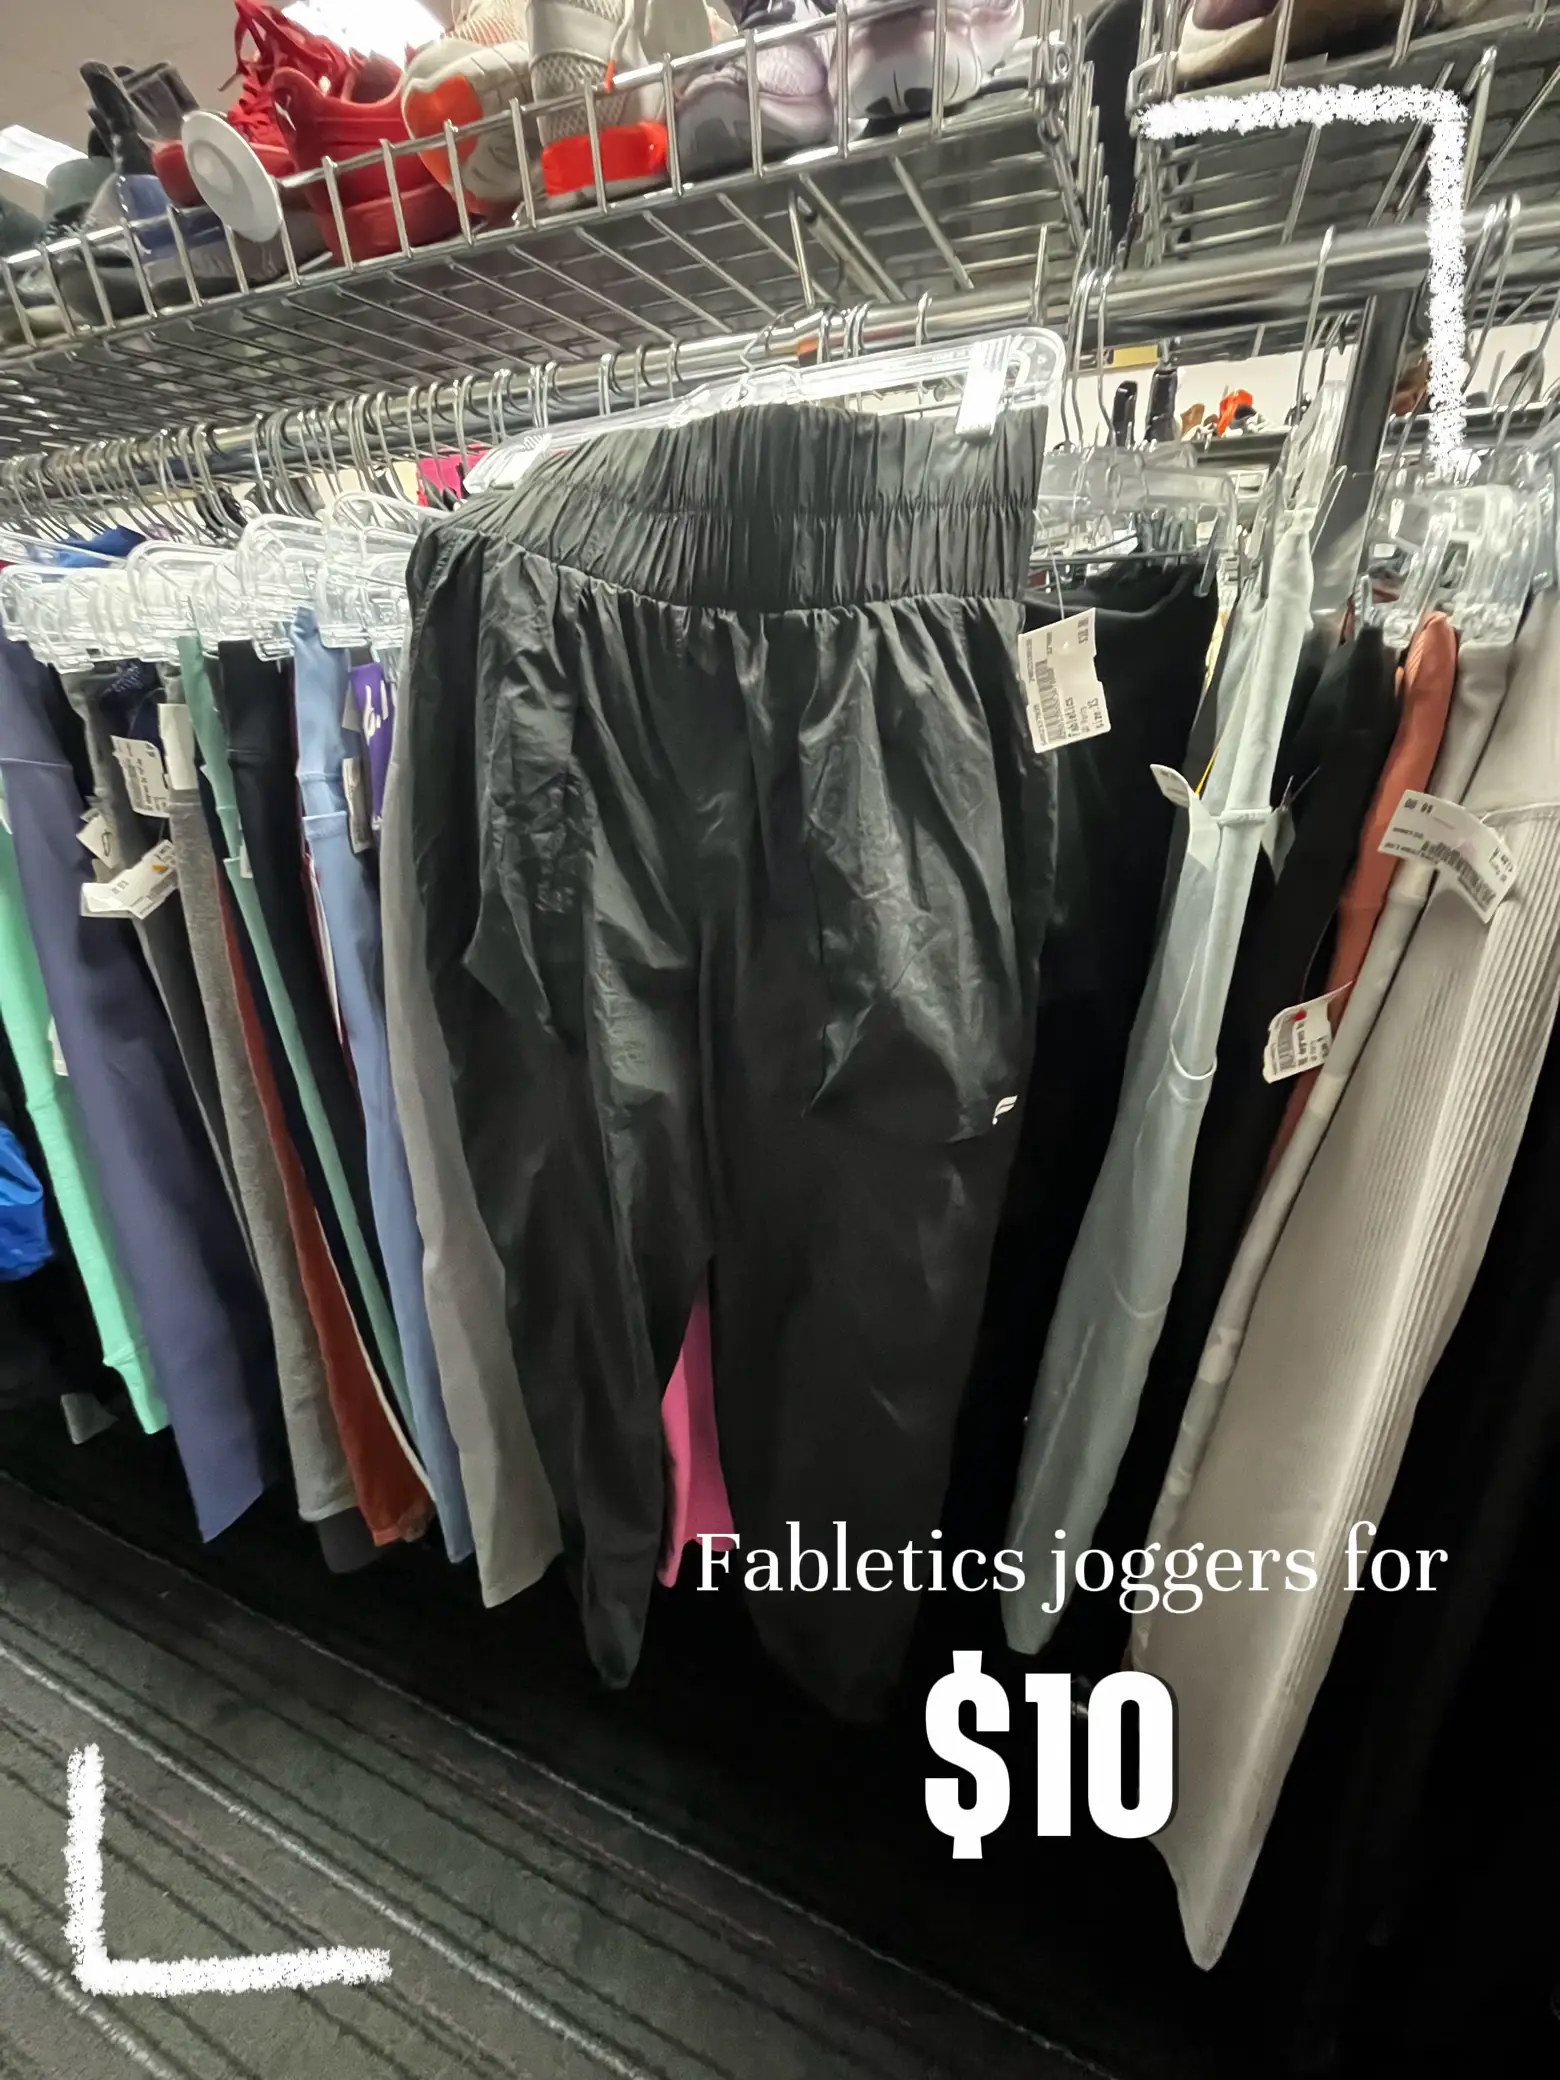 Your First Look Inside Plato's Closet, Opening May 18 — The Kokomo